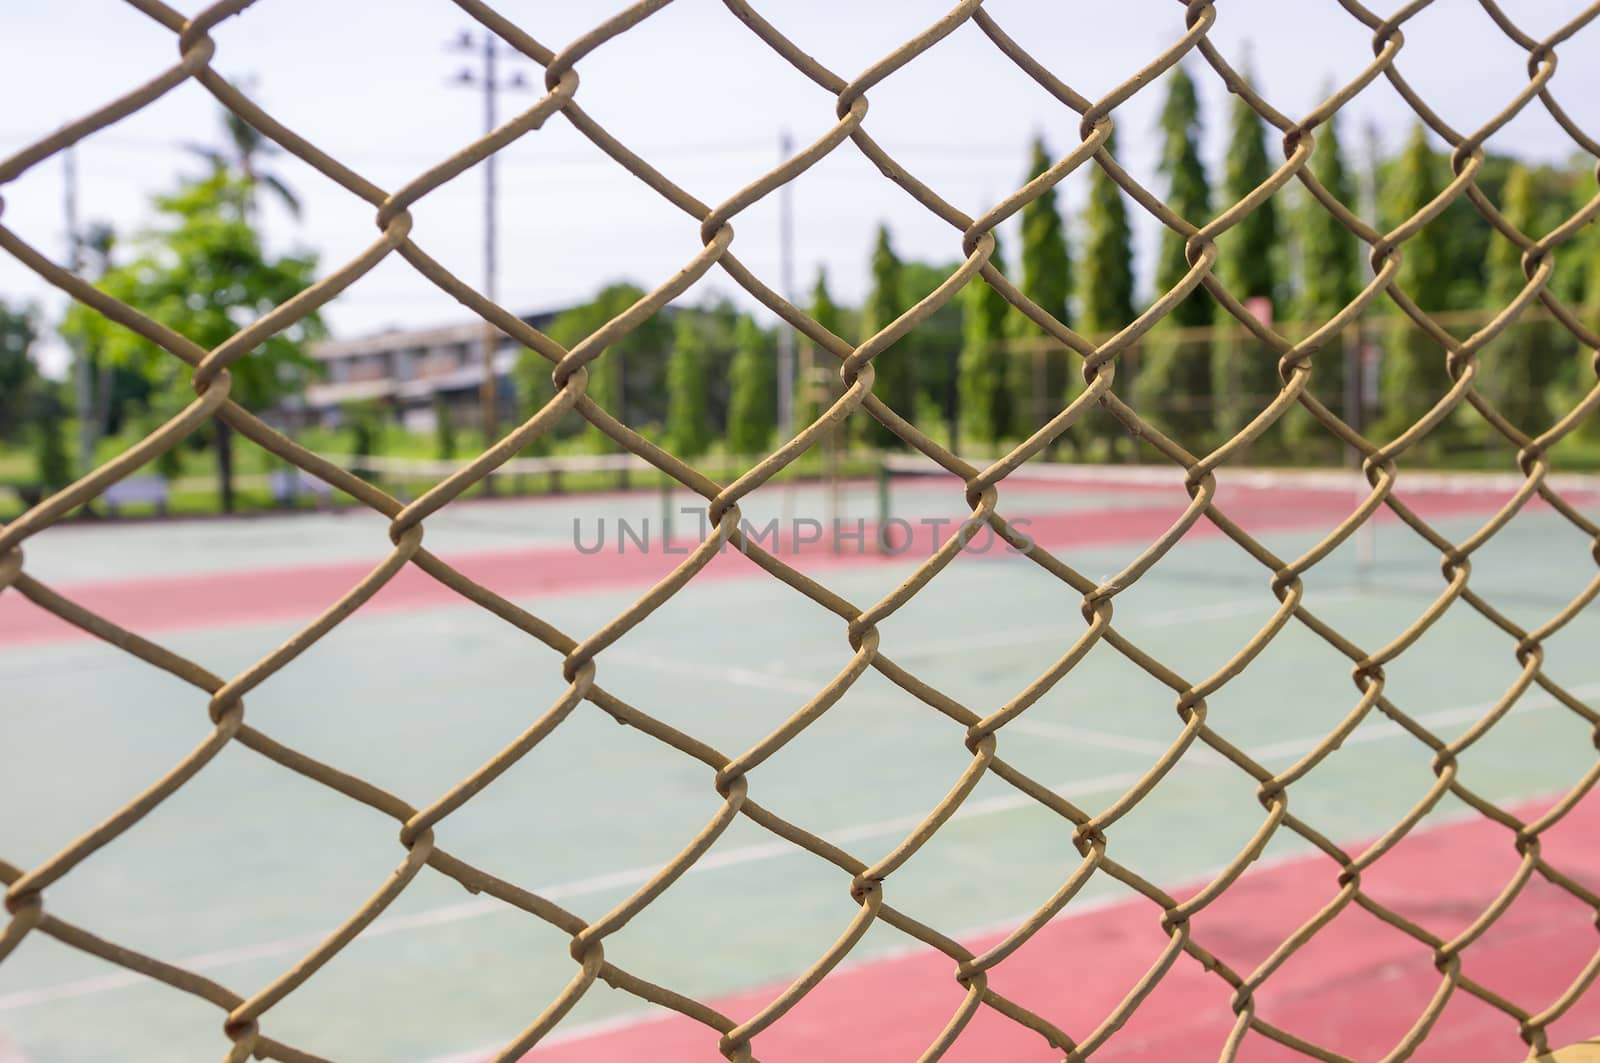 Metal mesh wire fence with blur tennis court background